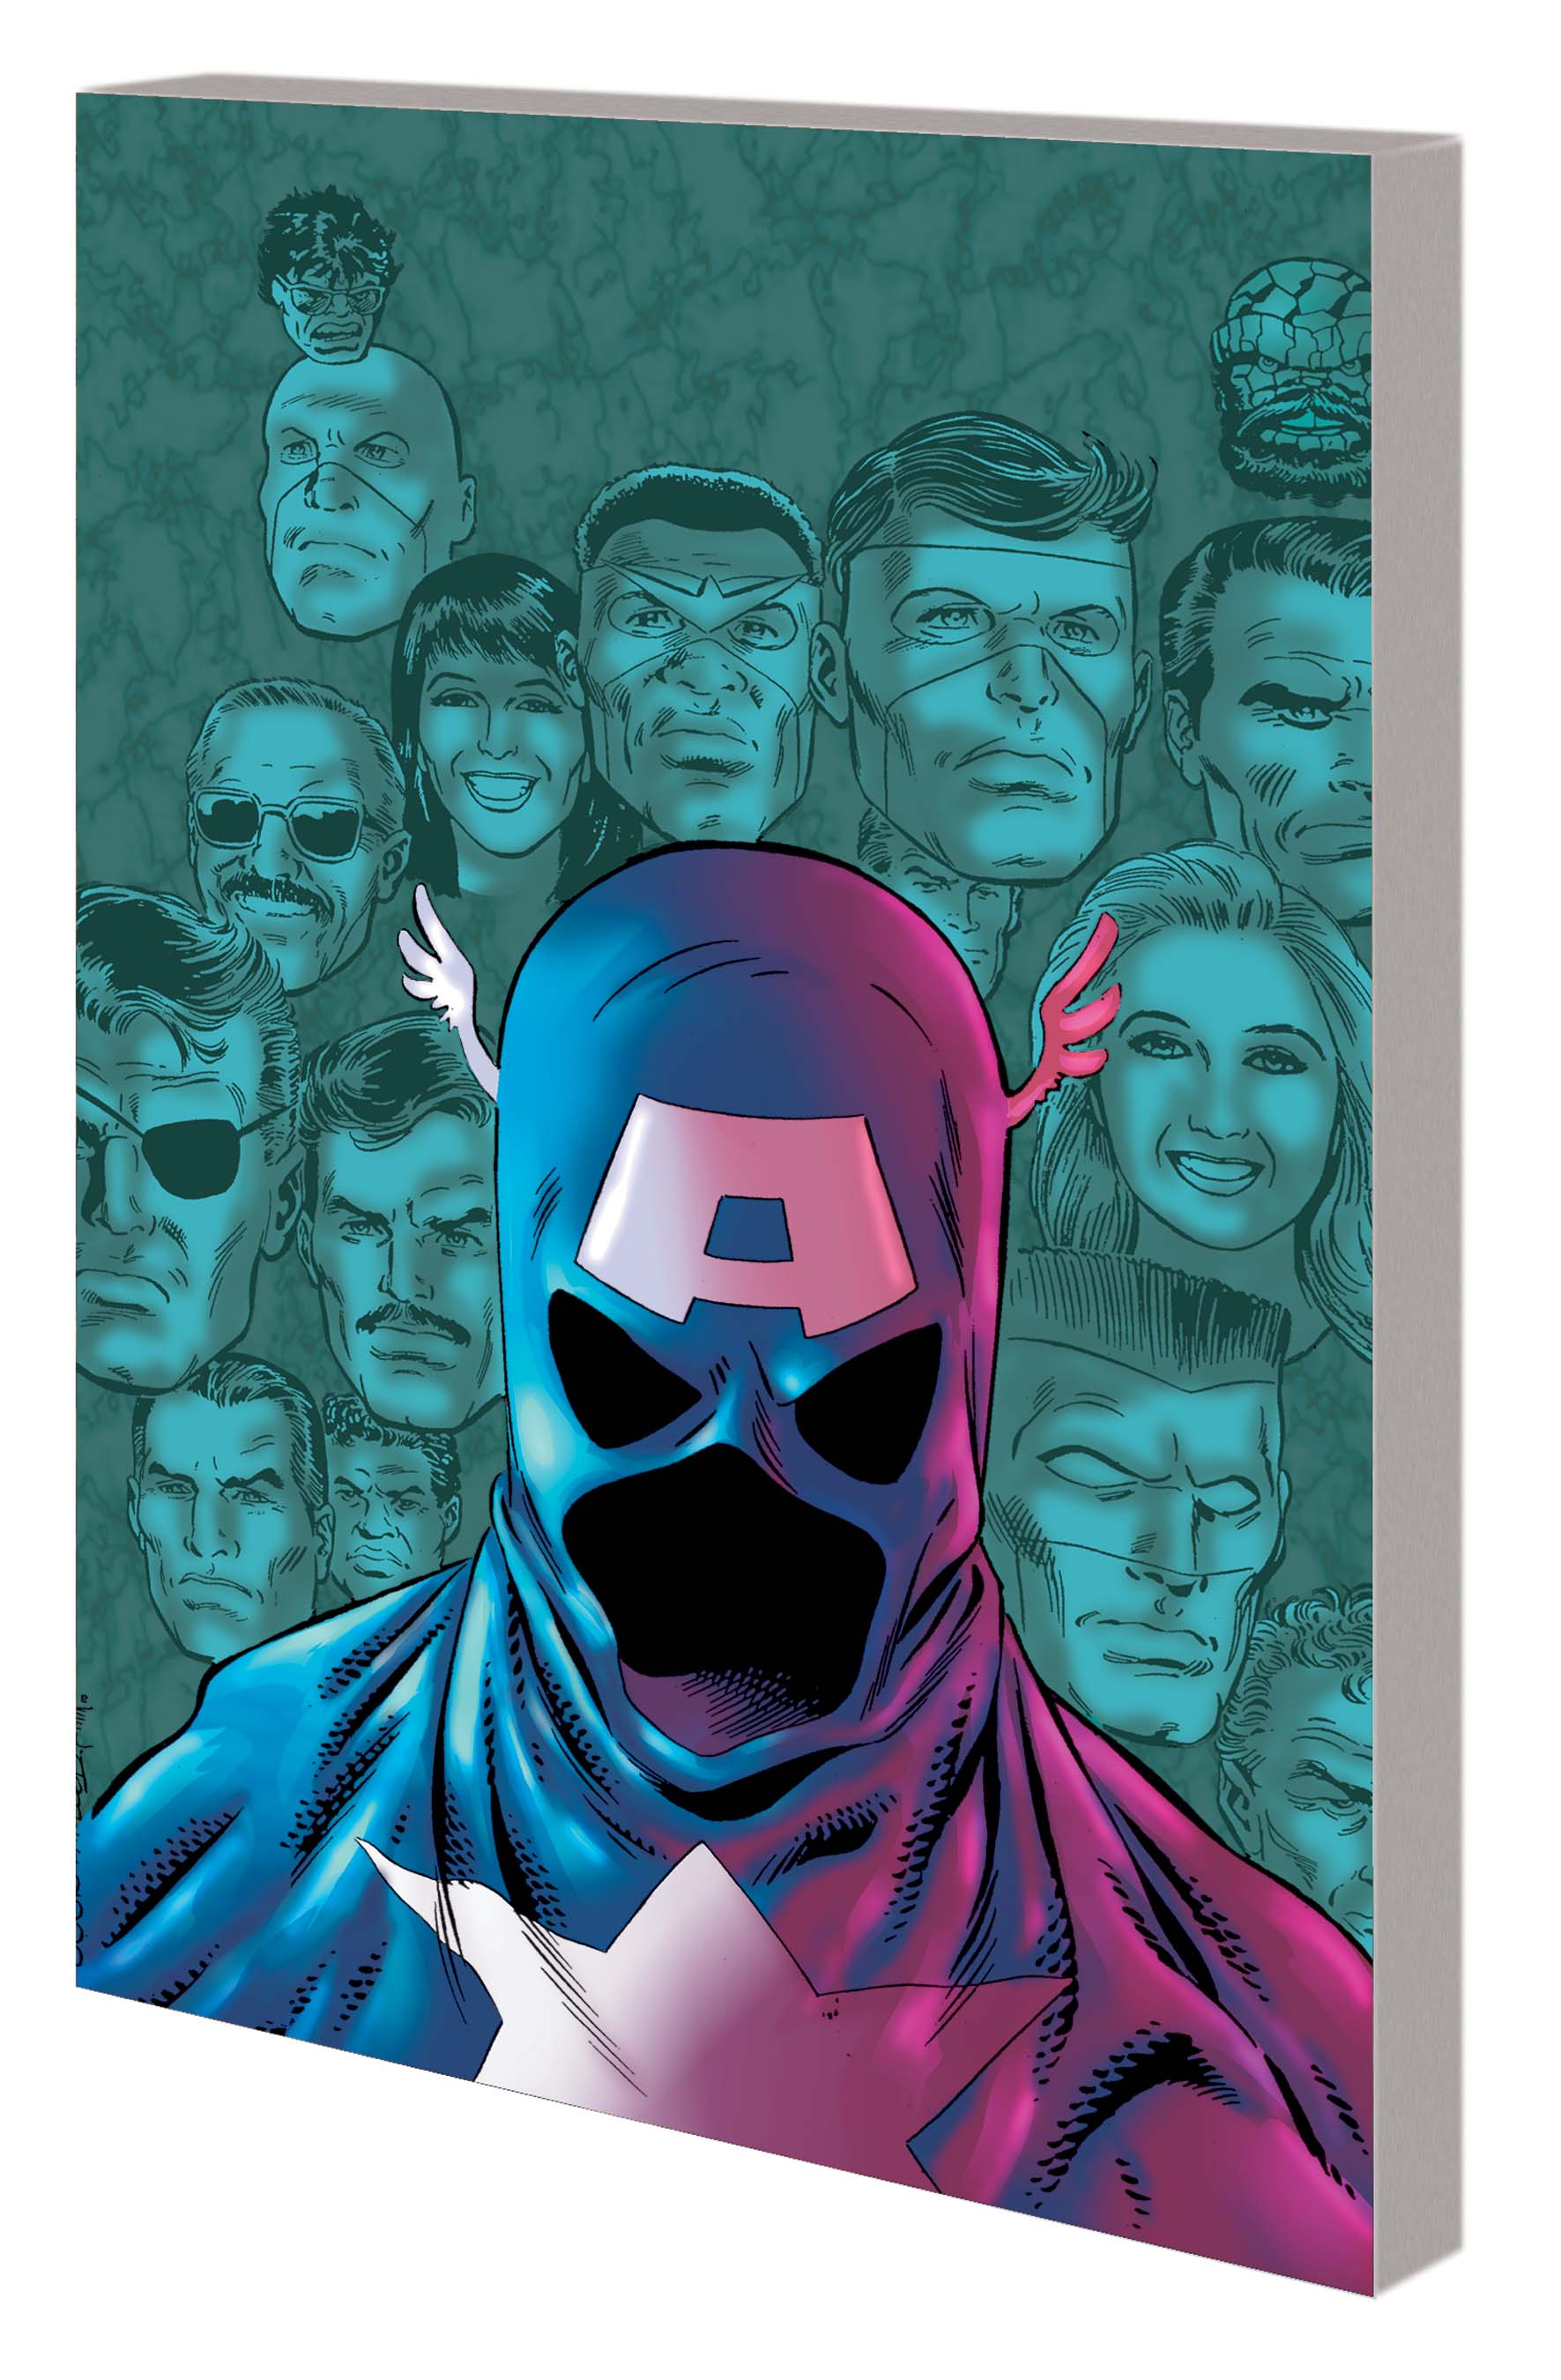 Captain America: The Legacy of Captain America (Trade Paperback)